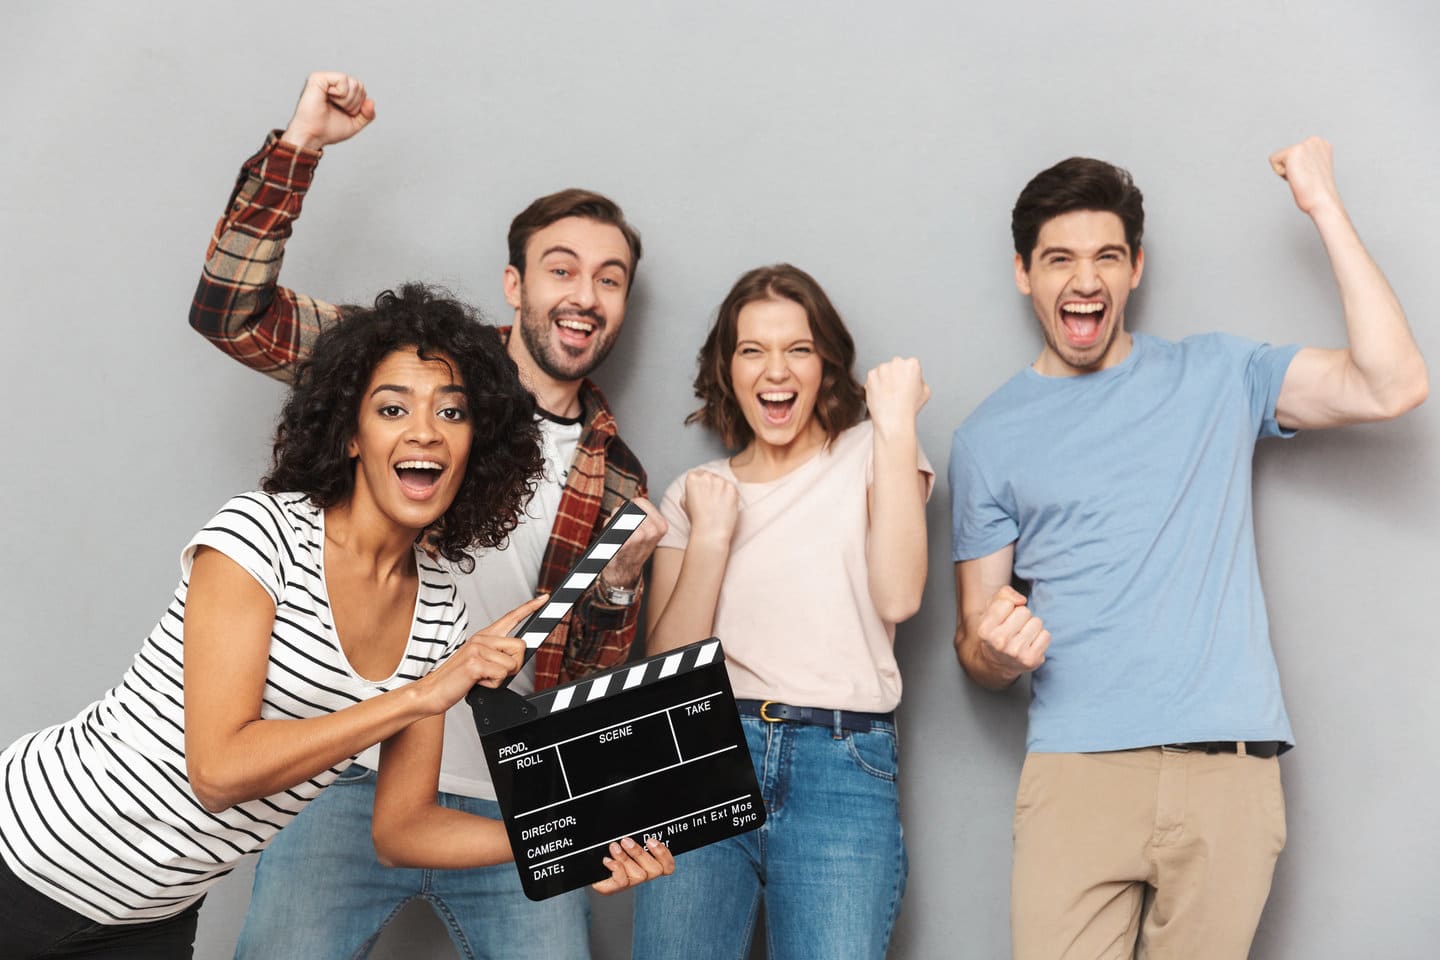 Make money as an actor by creating your own show